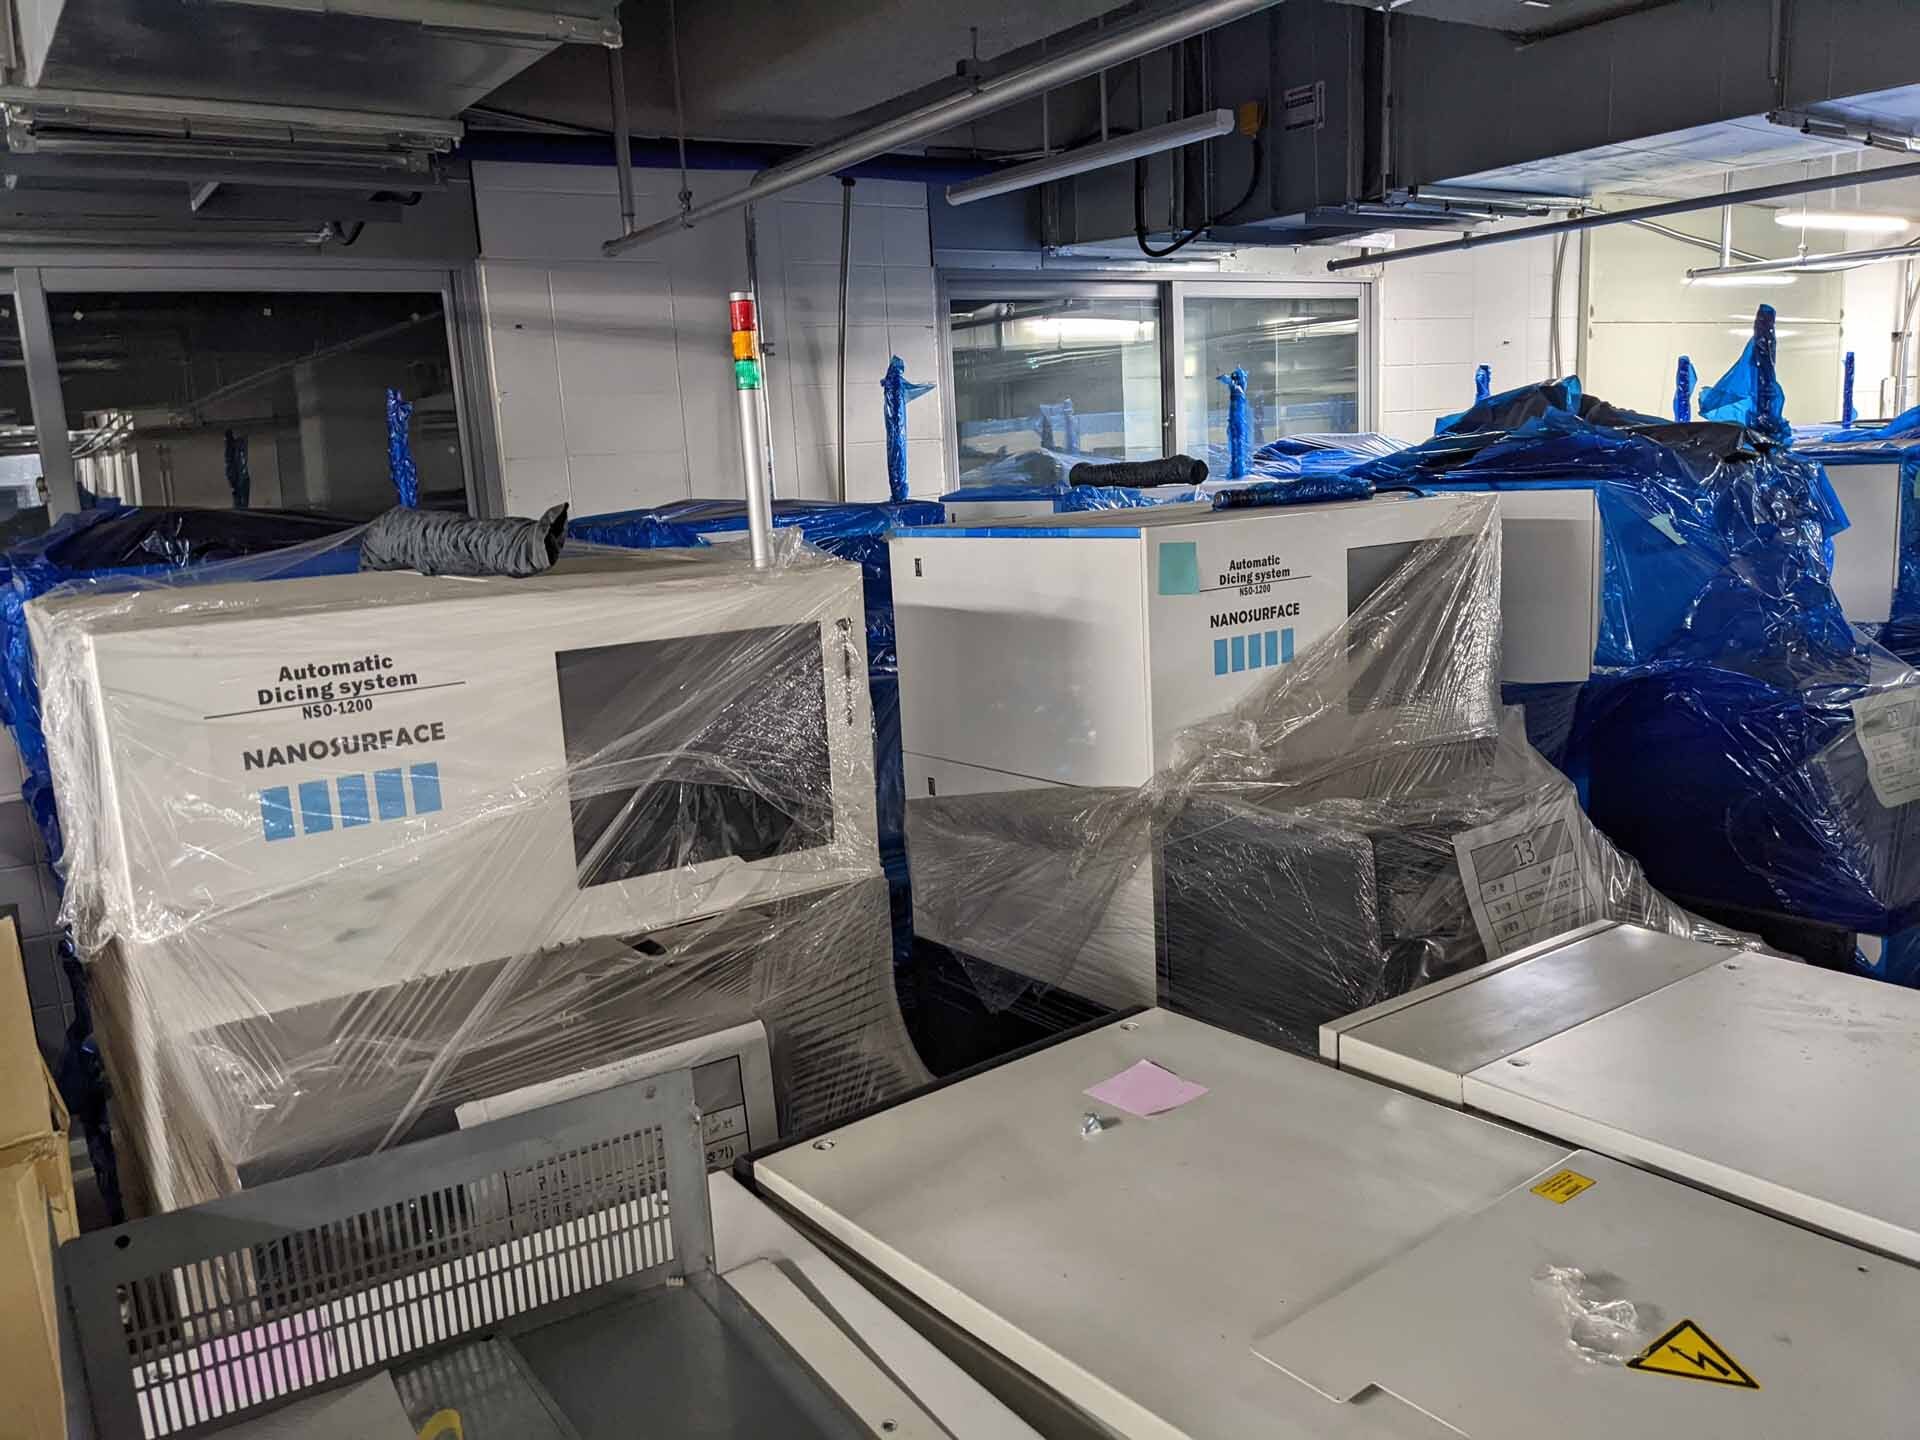 Photo Used NTS / NANOSURFACE NSO-1200 For Sale